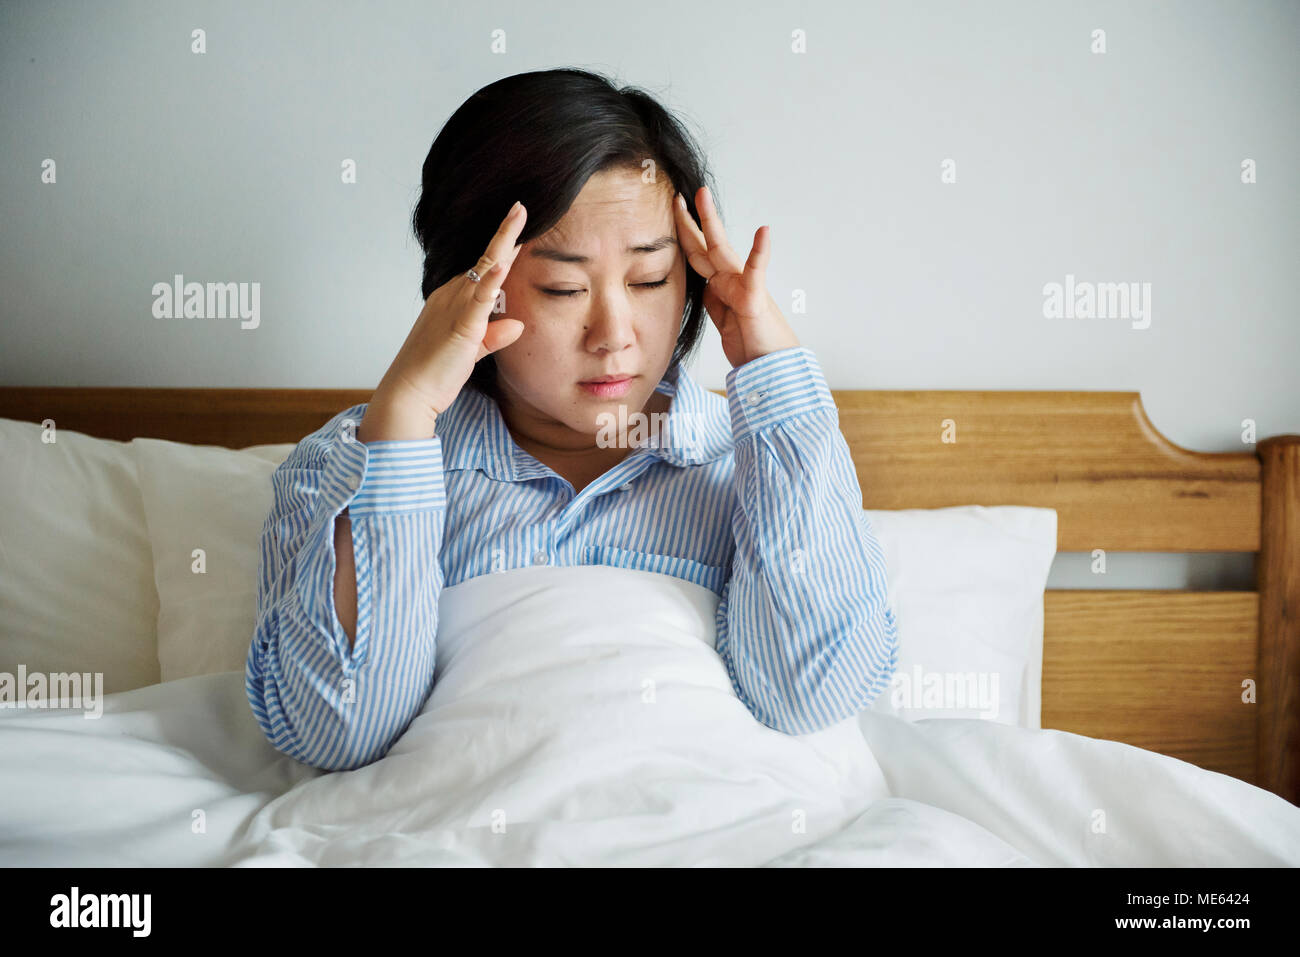 A woman waking up with headache Stock Photo